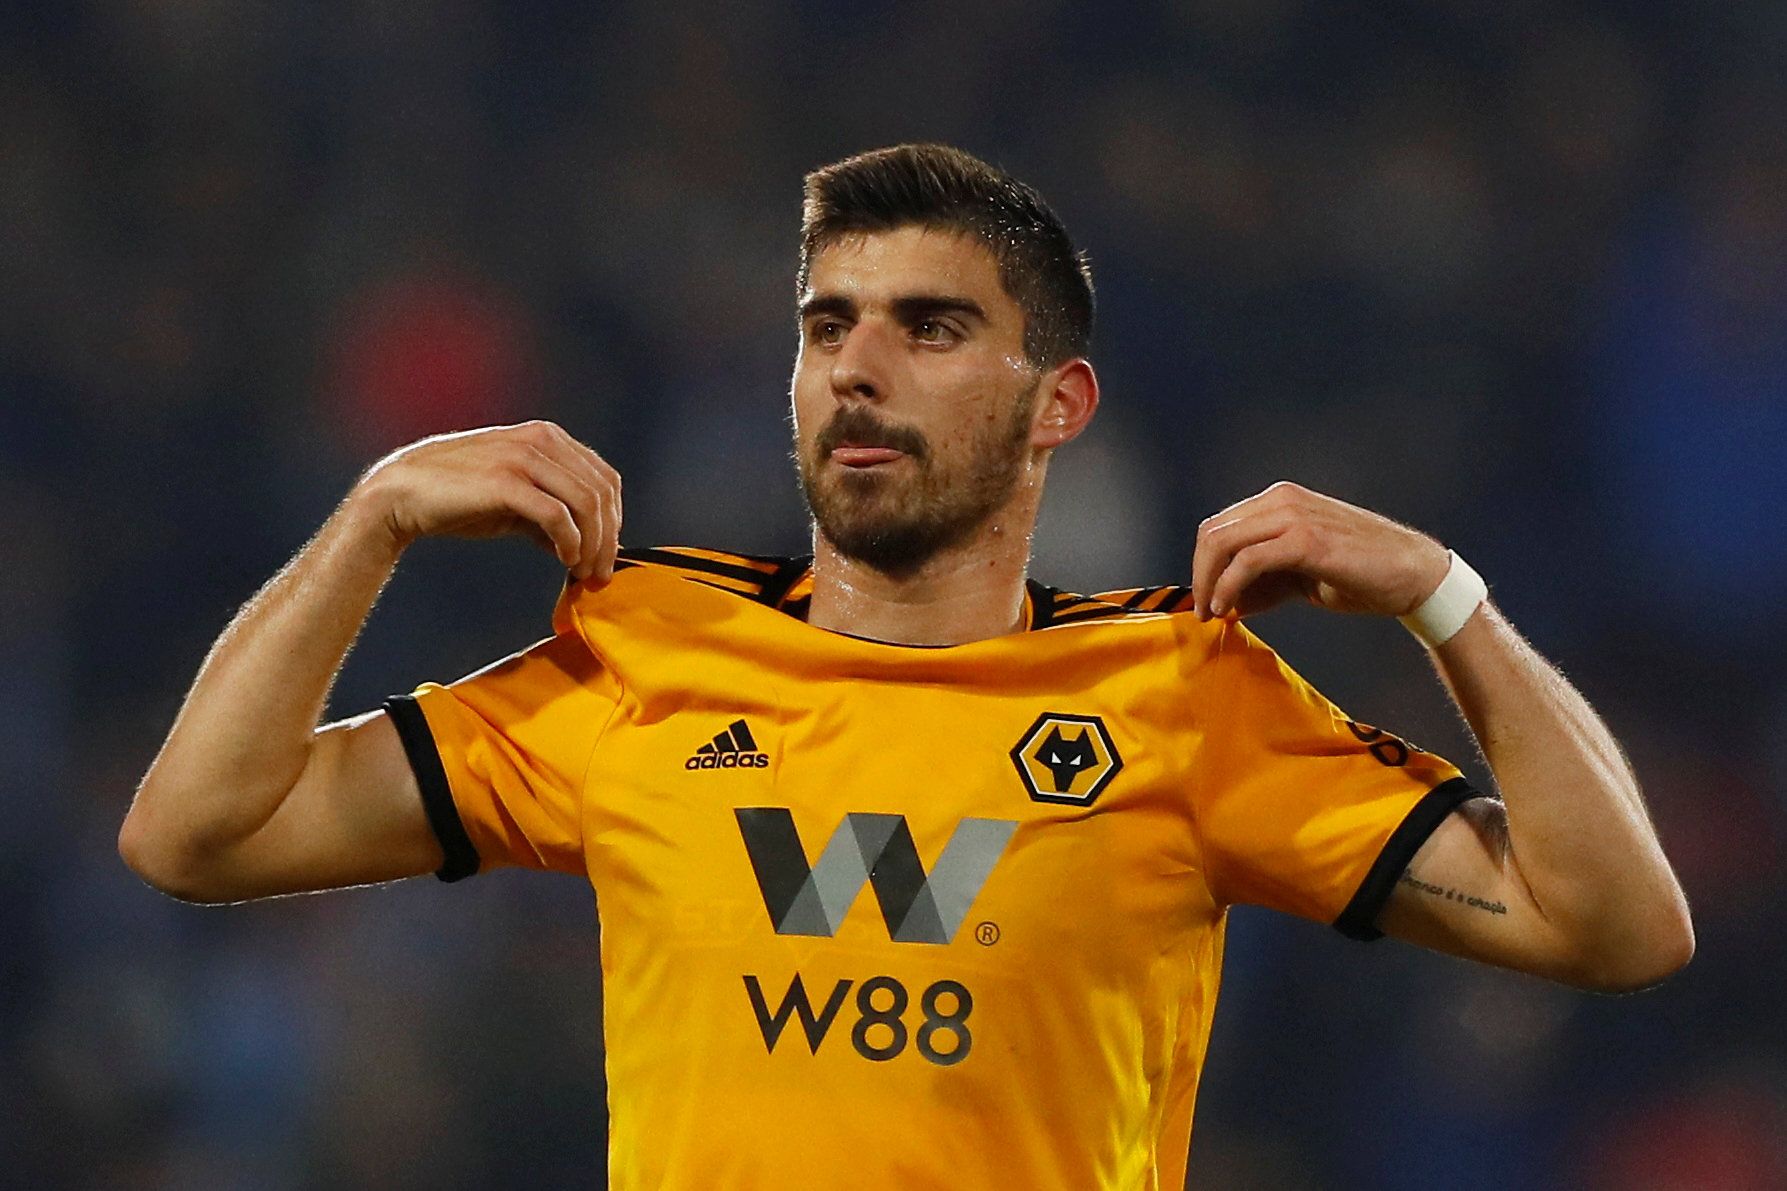 Soccer Football - Premier League - Huddersfield Town v Wolverhampton Wanderers - John Smith's Stadium, Huddersfield, Britain - February 26, 2019  Wolverhampton Wanderers' Ruben Neves              Action Images via Reuters/Jason Cairnduff  EDITORIAL USE ONLY. No use with unauthorized audio, video, data, fixture lists, club/league logos or "live" services. Online in-match use limited to 75 images, no video emulation. No use in betting, games or single club/league/player publications.  Please conta